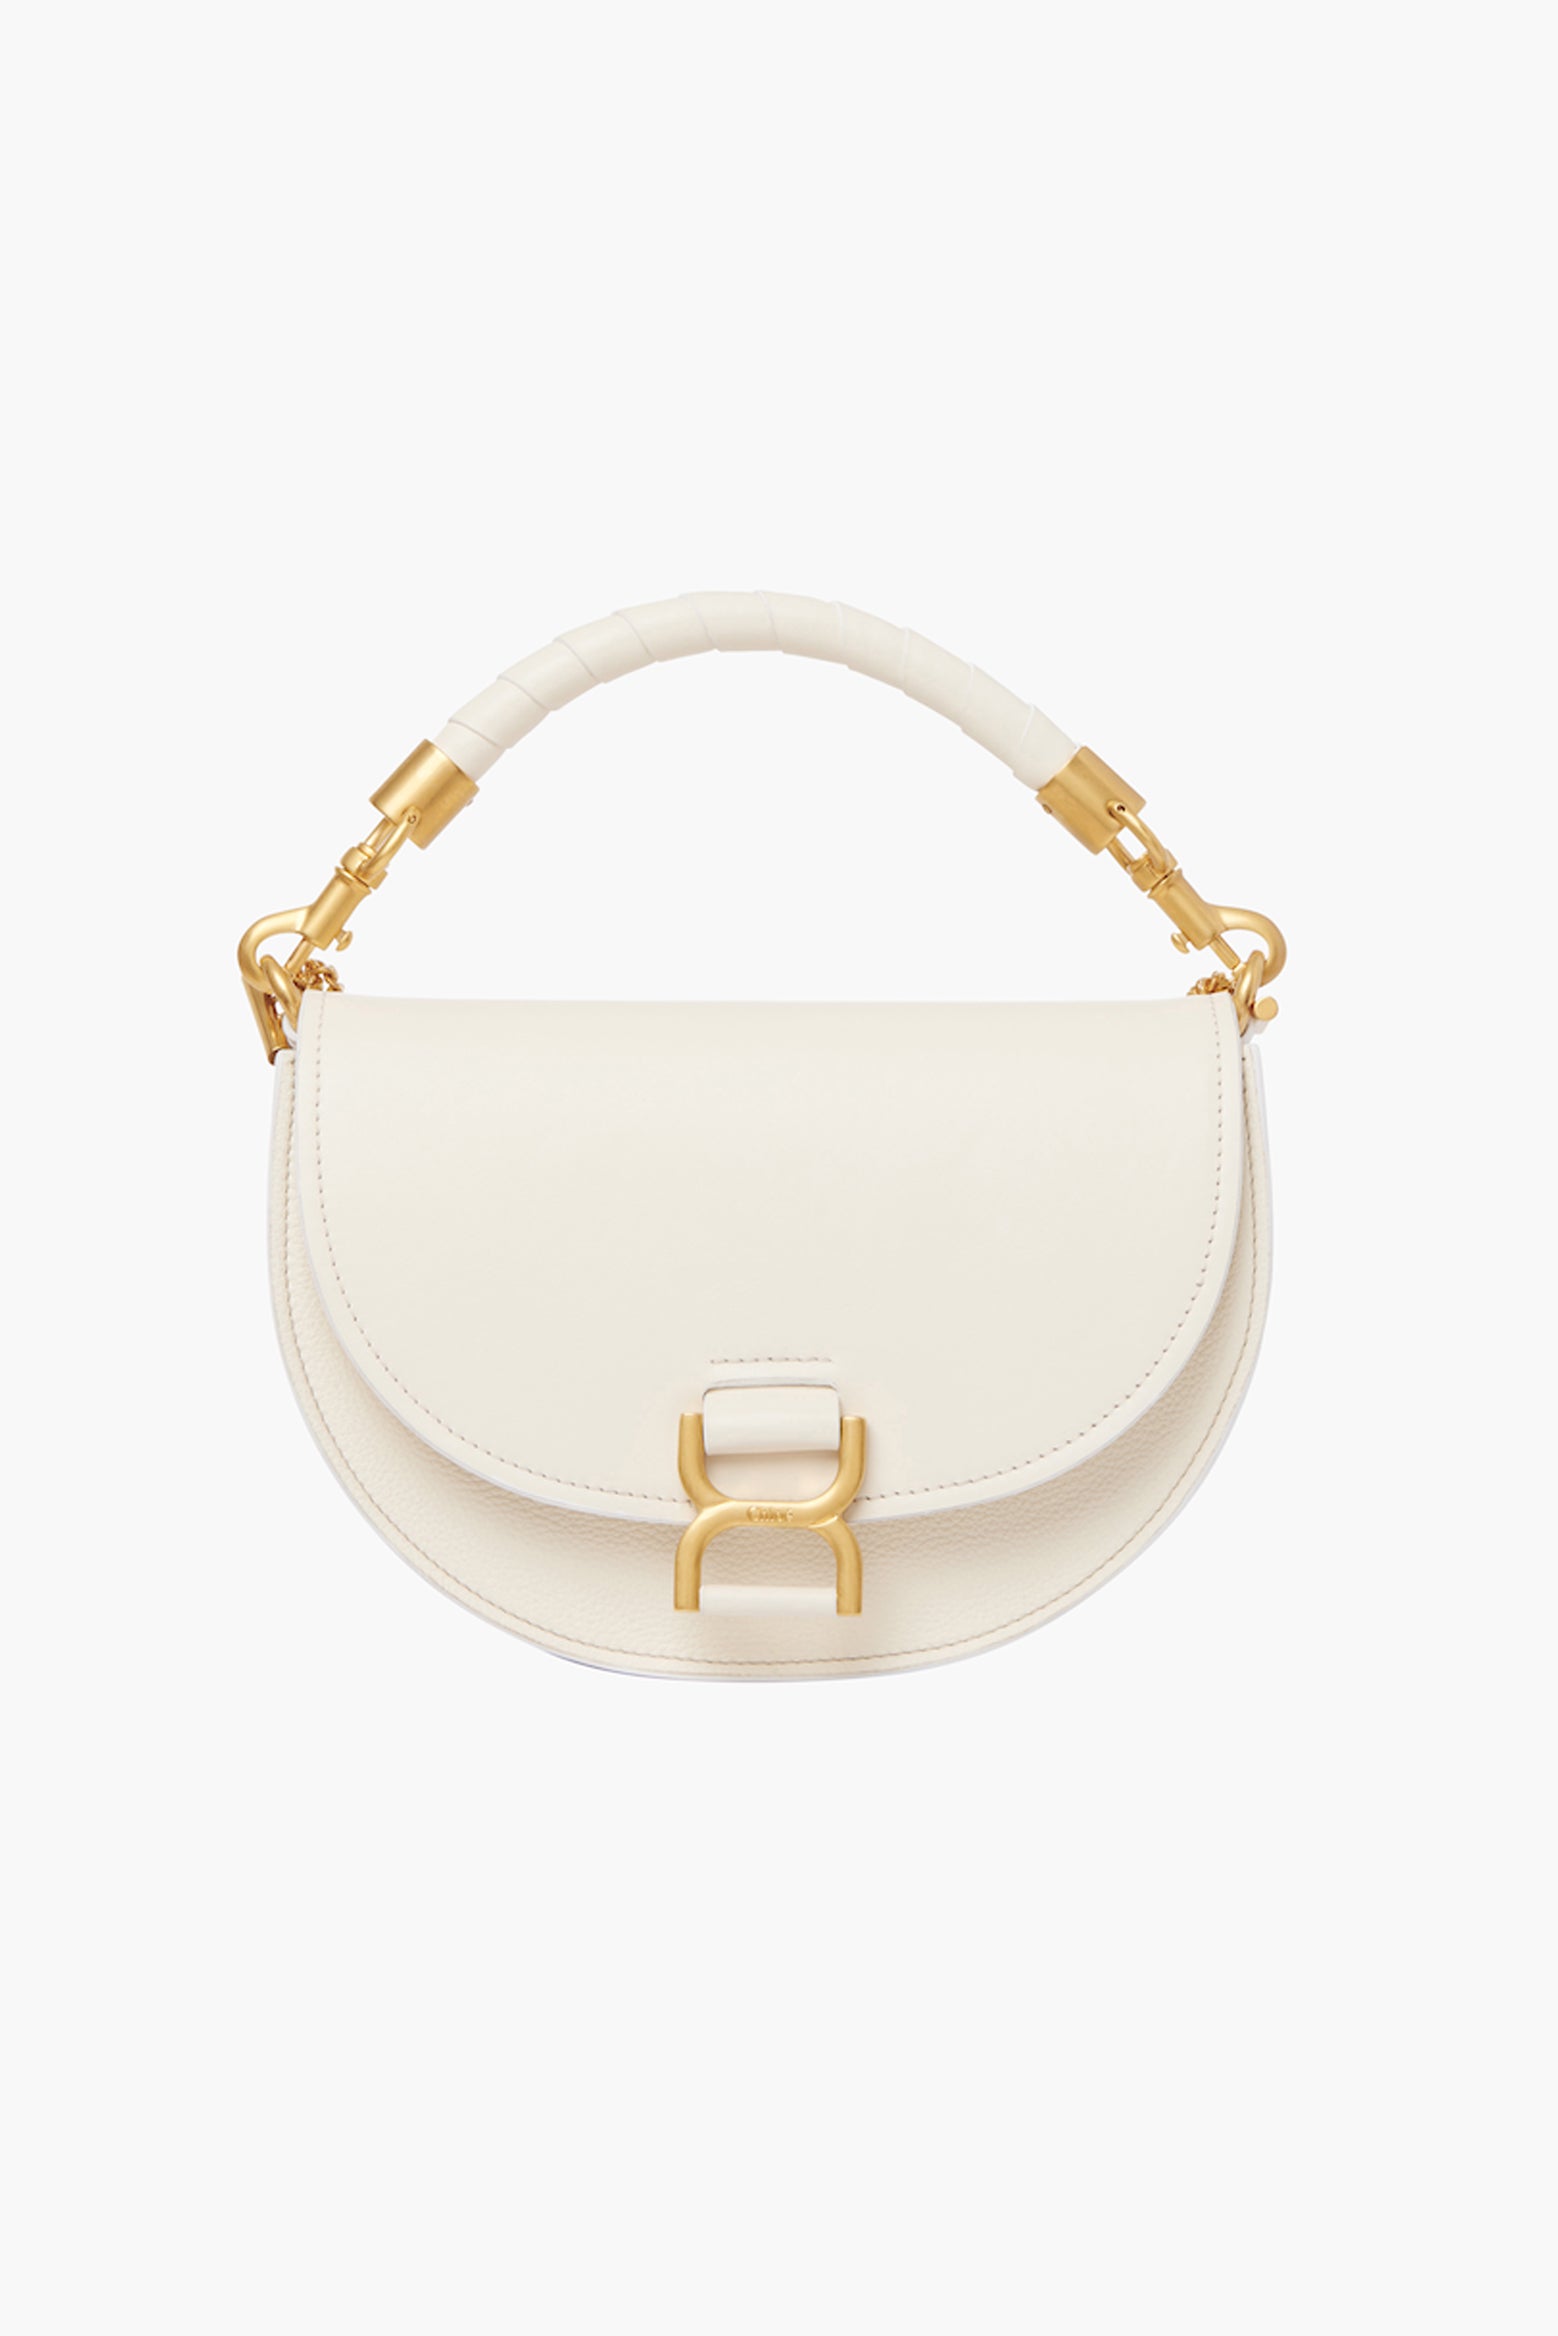 The Chloe Marcie Chain Flap Bag in Misty Ivory available at The New Trend Australia